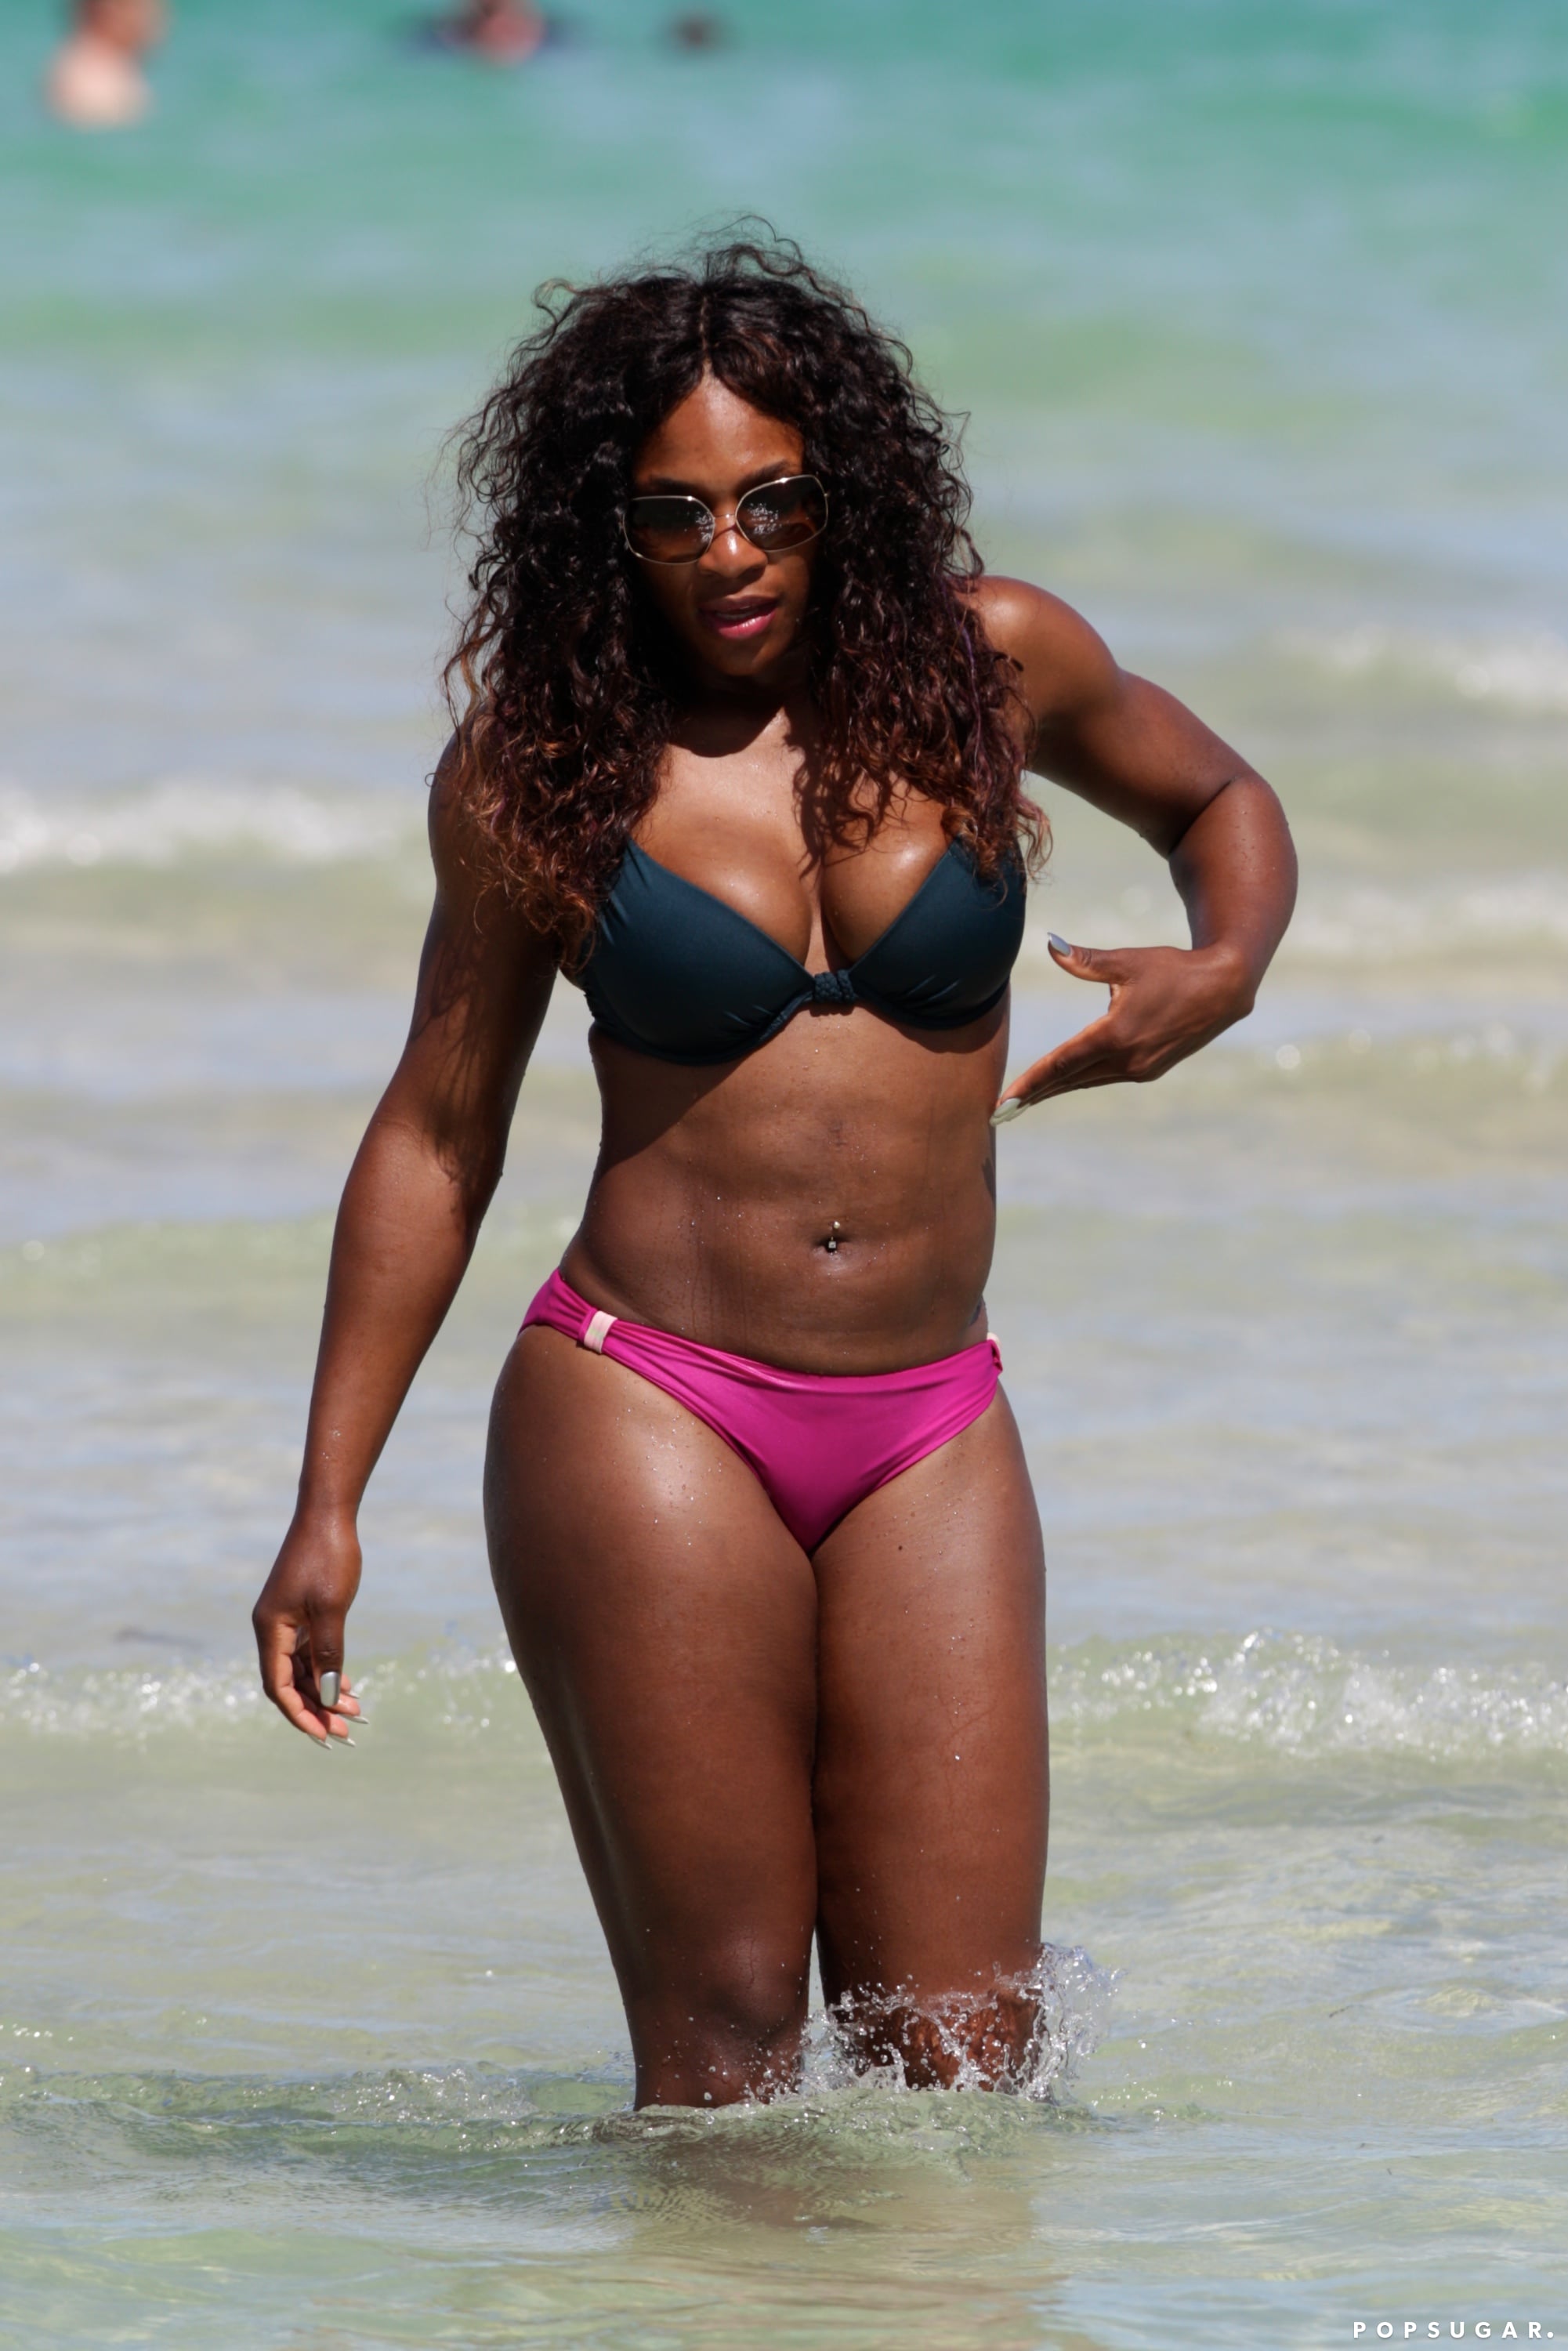 Serena Williams' Sporty Swimsuit Style: Gotta Have It or Make It Stop?